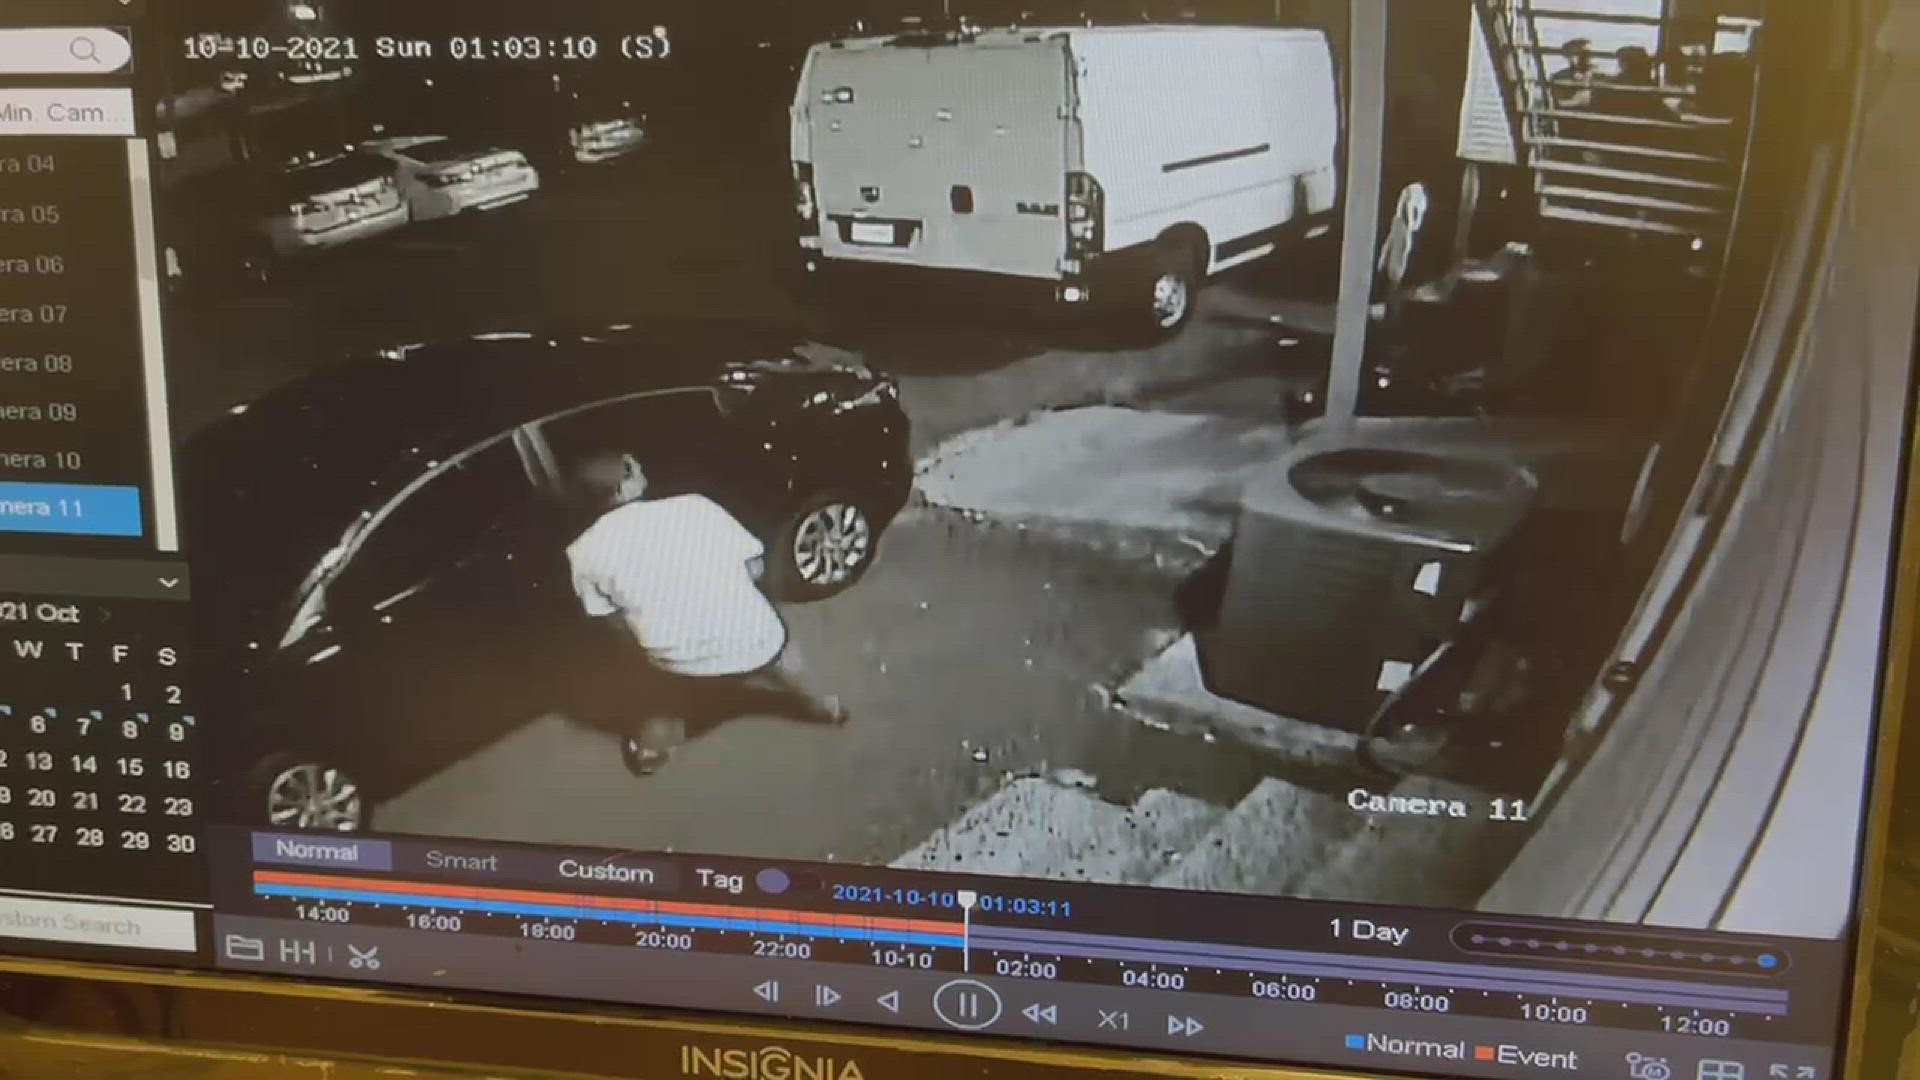 Police are looking for suspects in a wild shoot-out that occurred in the parking lot of an East Haven bar.